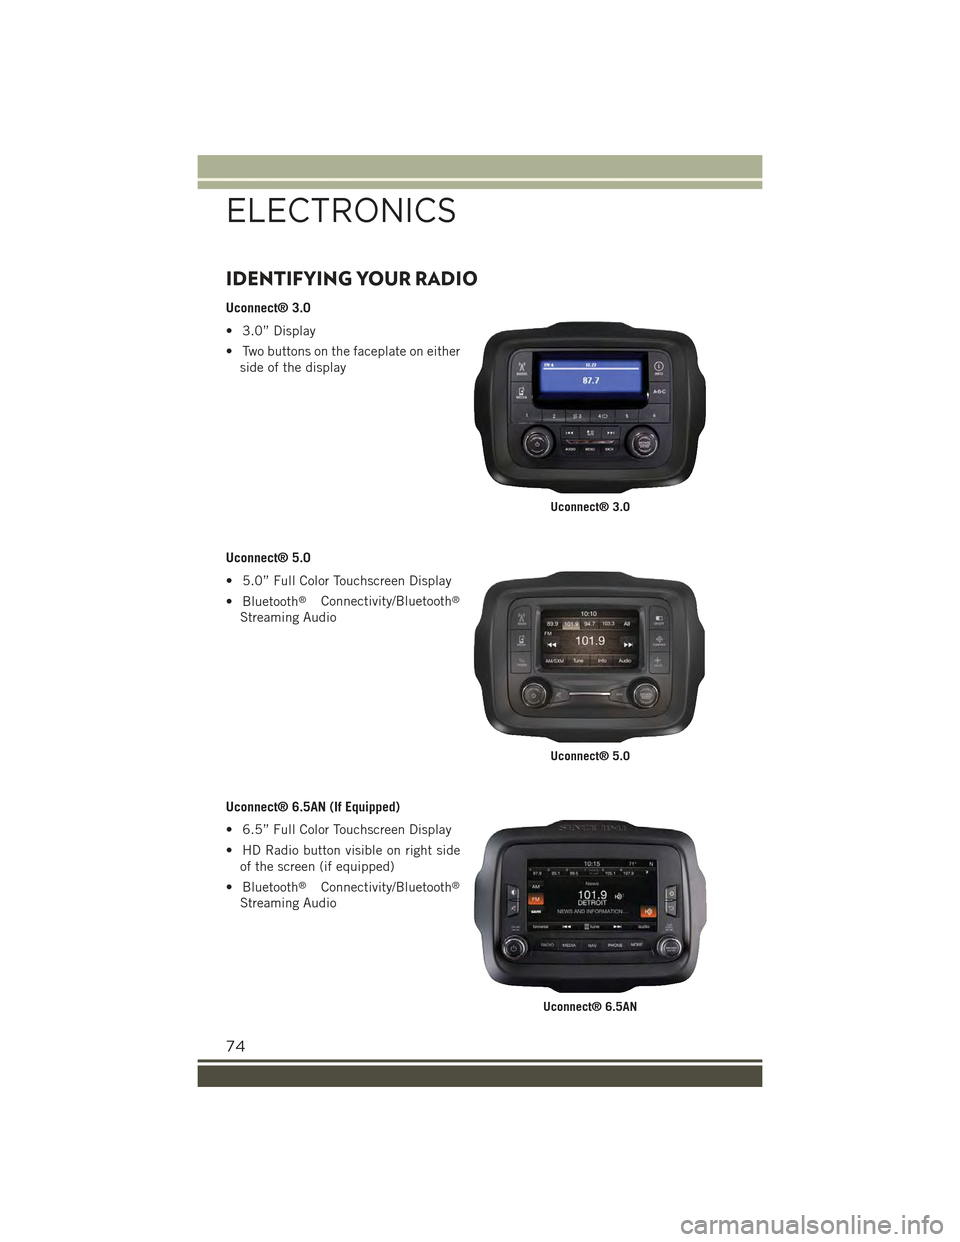 JEEP RENEGADE 2015 1.G User Guide IDENTIFYING YOUR RADIO
Uconnect® 3.0
• 3.0” Display
• Two buttons on the faceplate on either
side of the display
Uconnect® 5.0
• 5.0” Full Color Touchscreen Display
• Bluetooth®Connecti